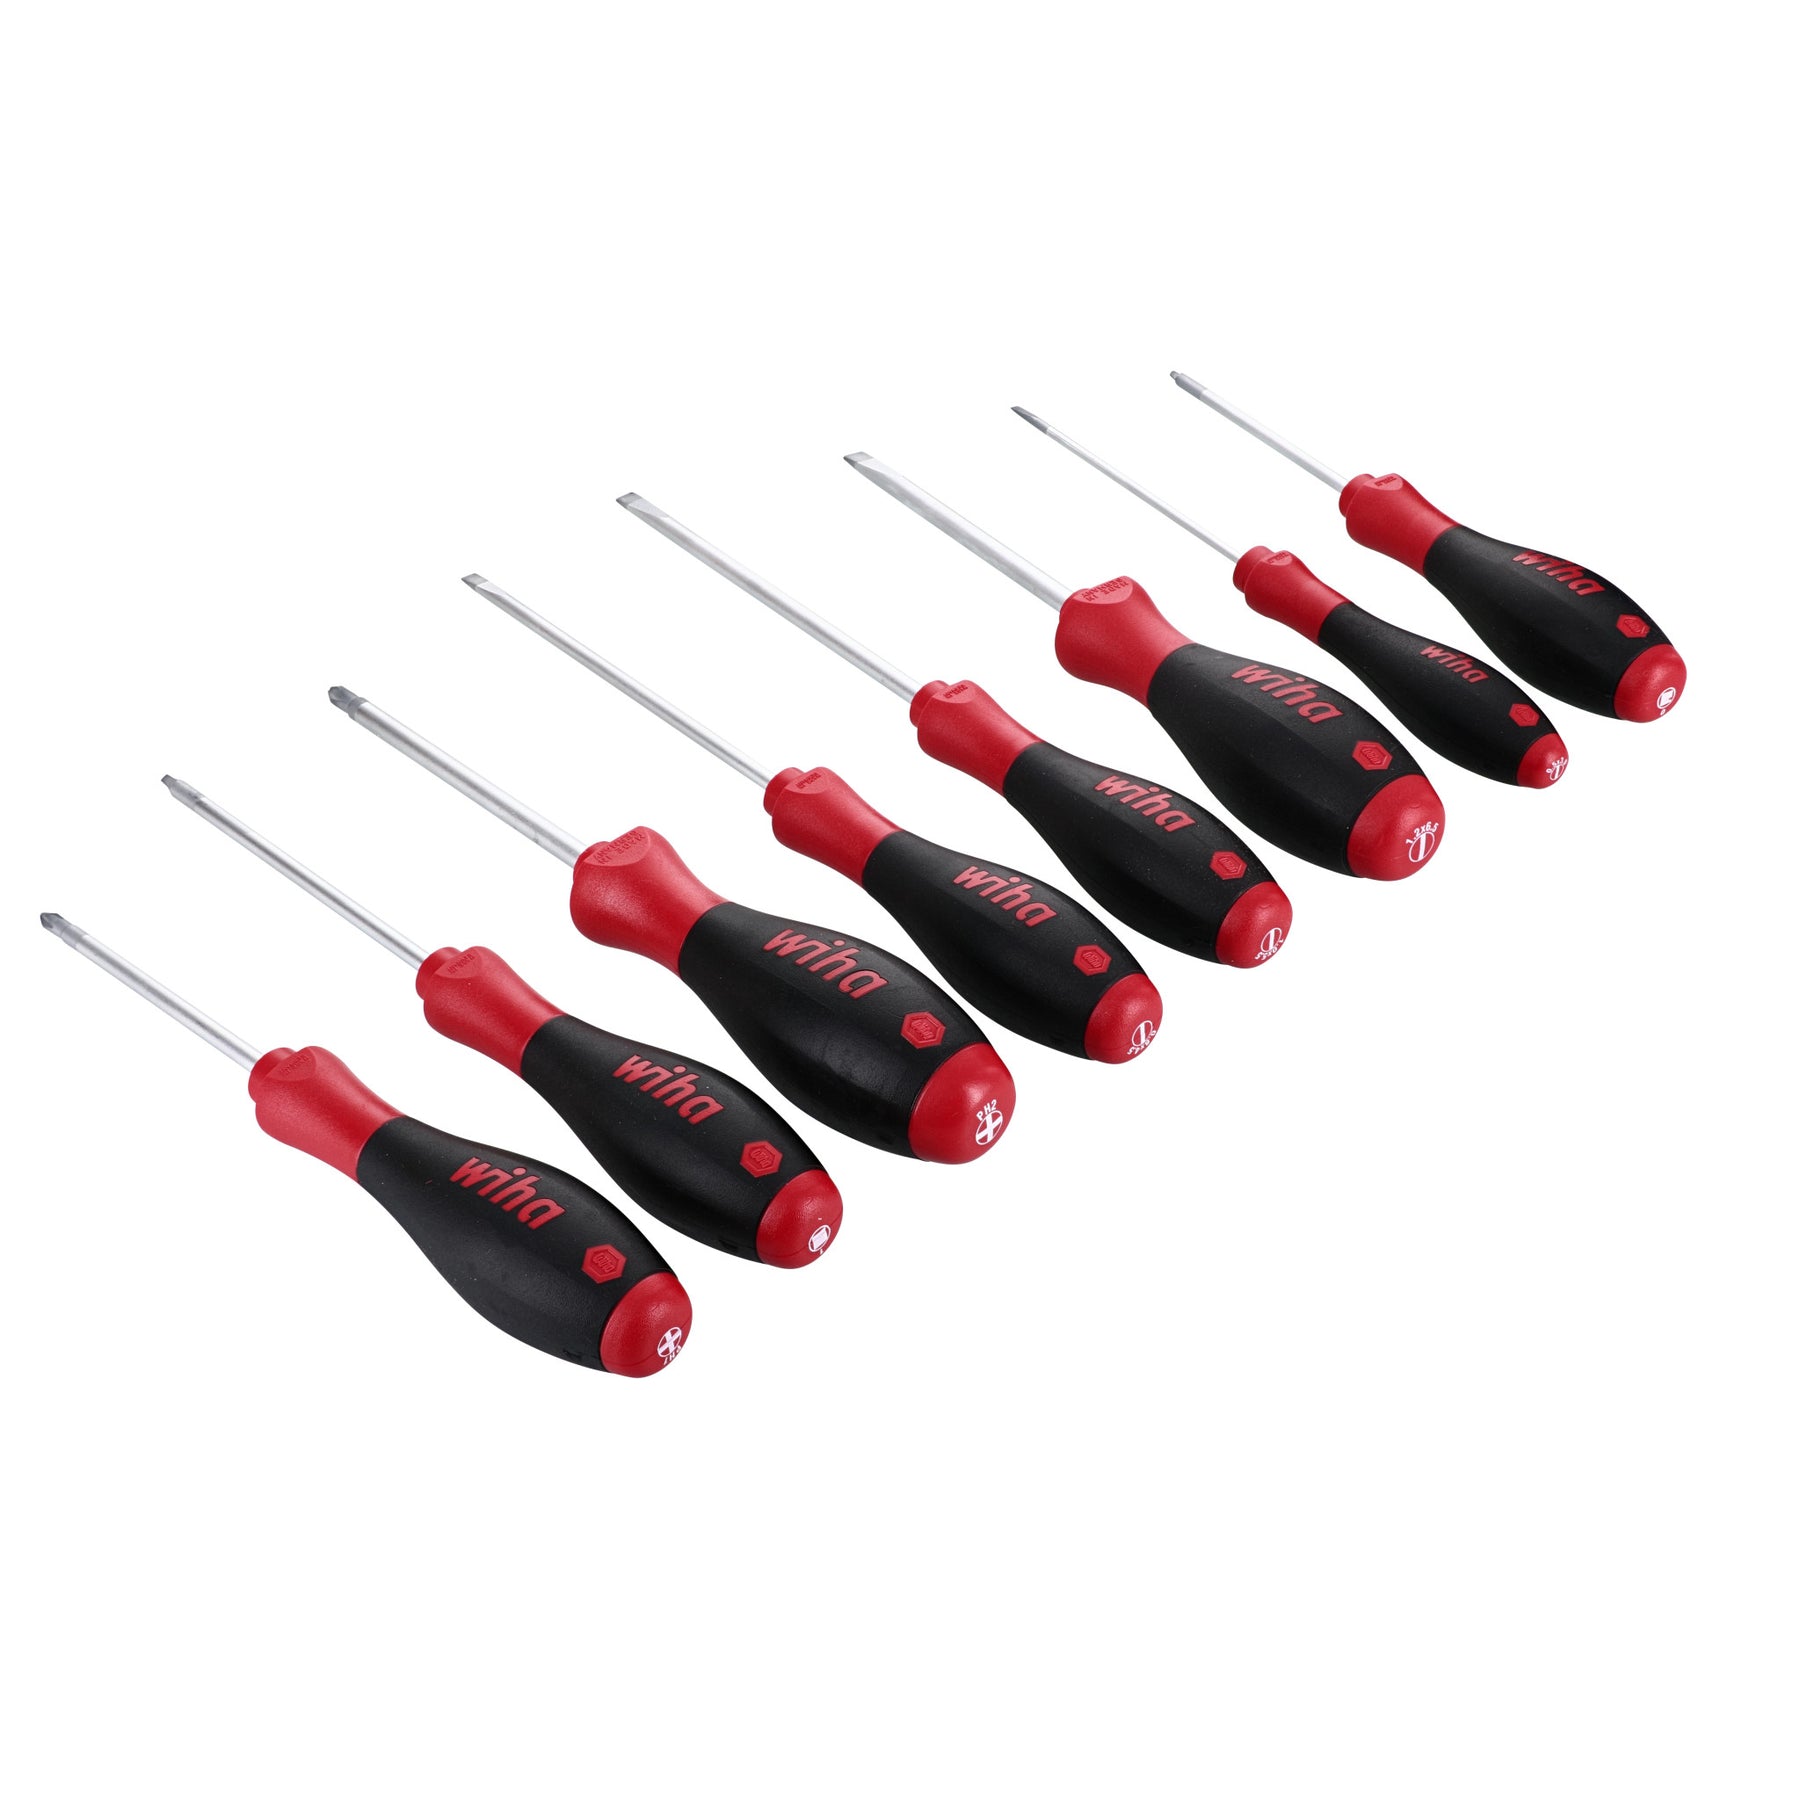 8 Piece SoftFinish Slotted and Phillips and Square Screwdriver Set